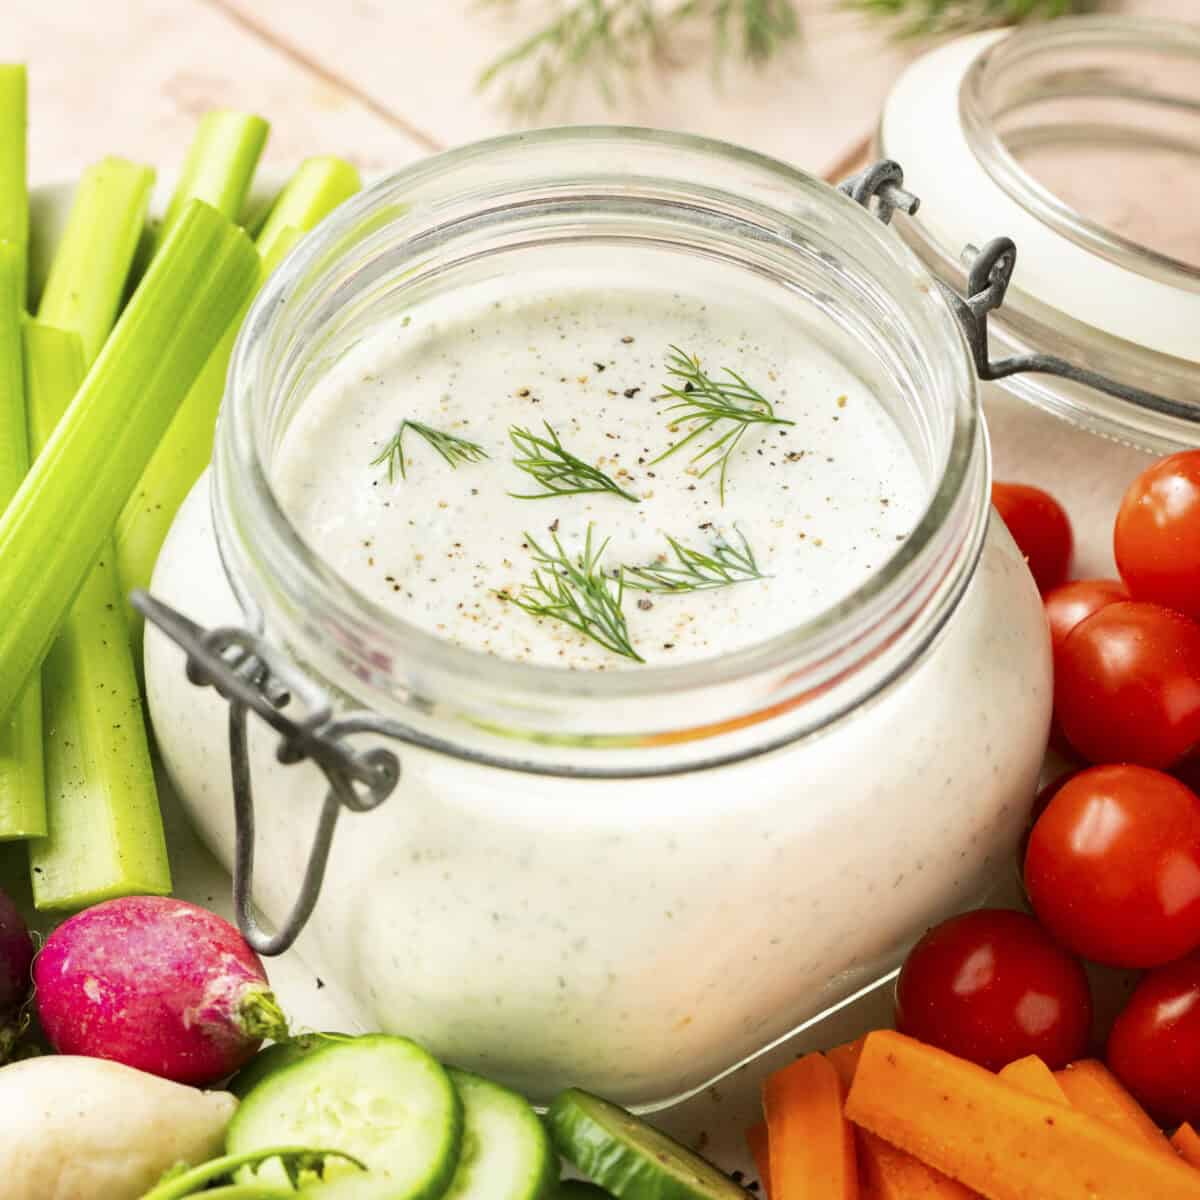 Cottage cheese based ranch dip in a sealable container with veggies around it.